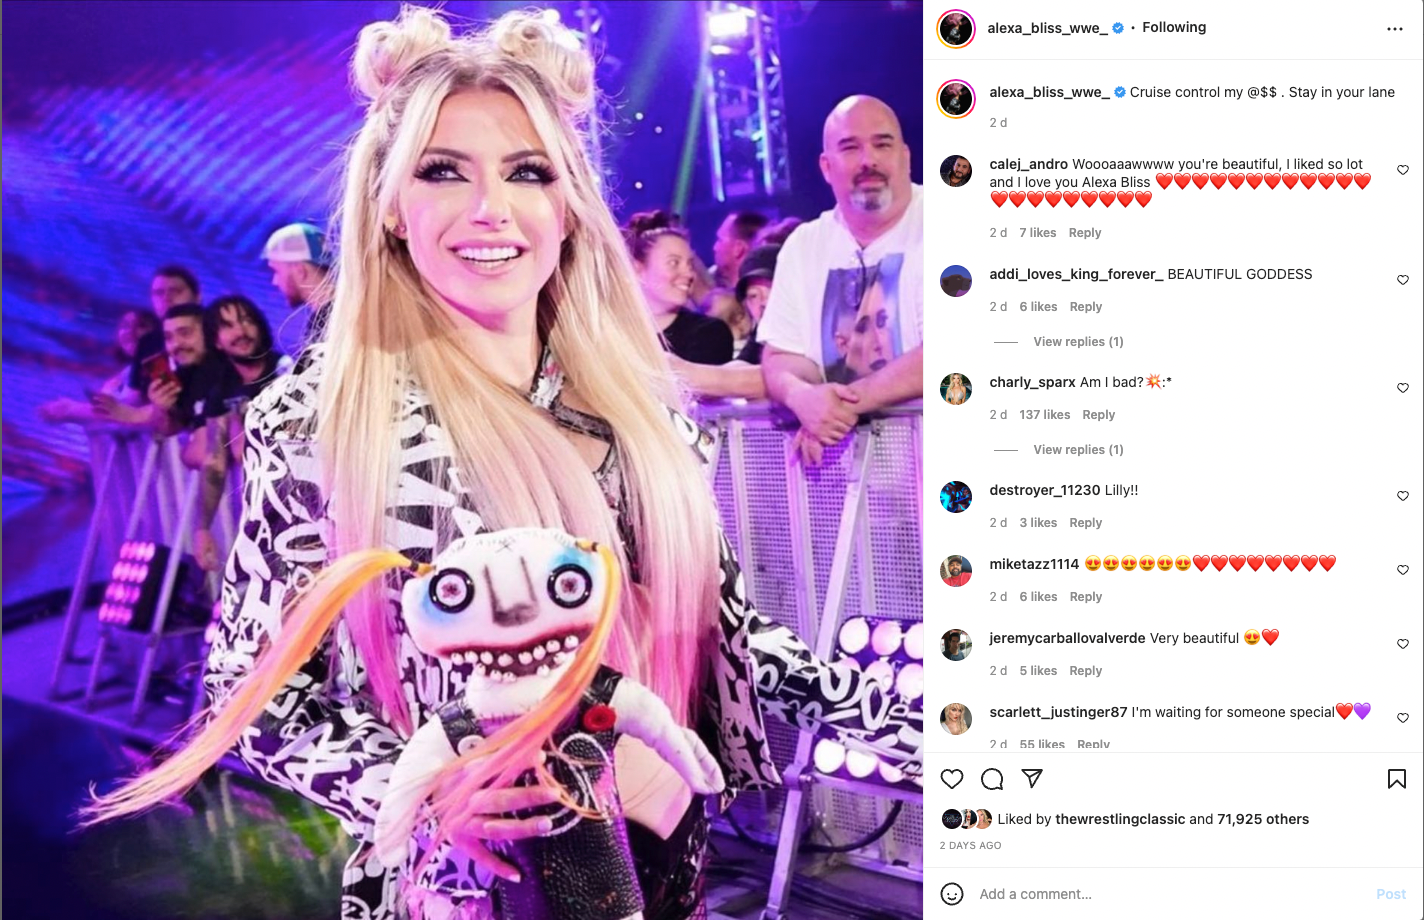 WWE's Alexa Bliss went full savage on Instagram with her caption